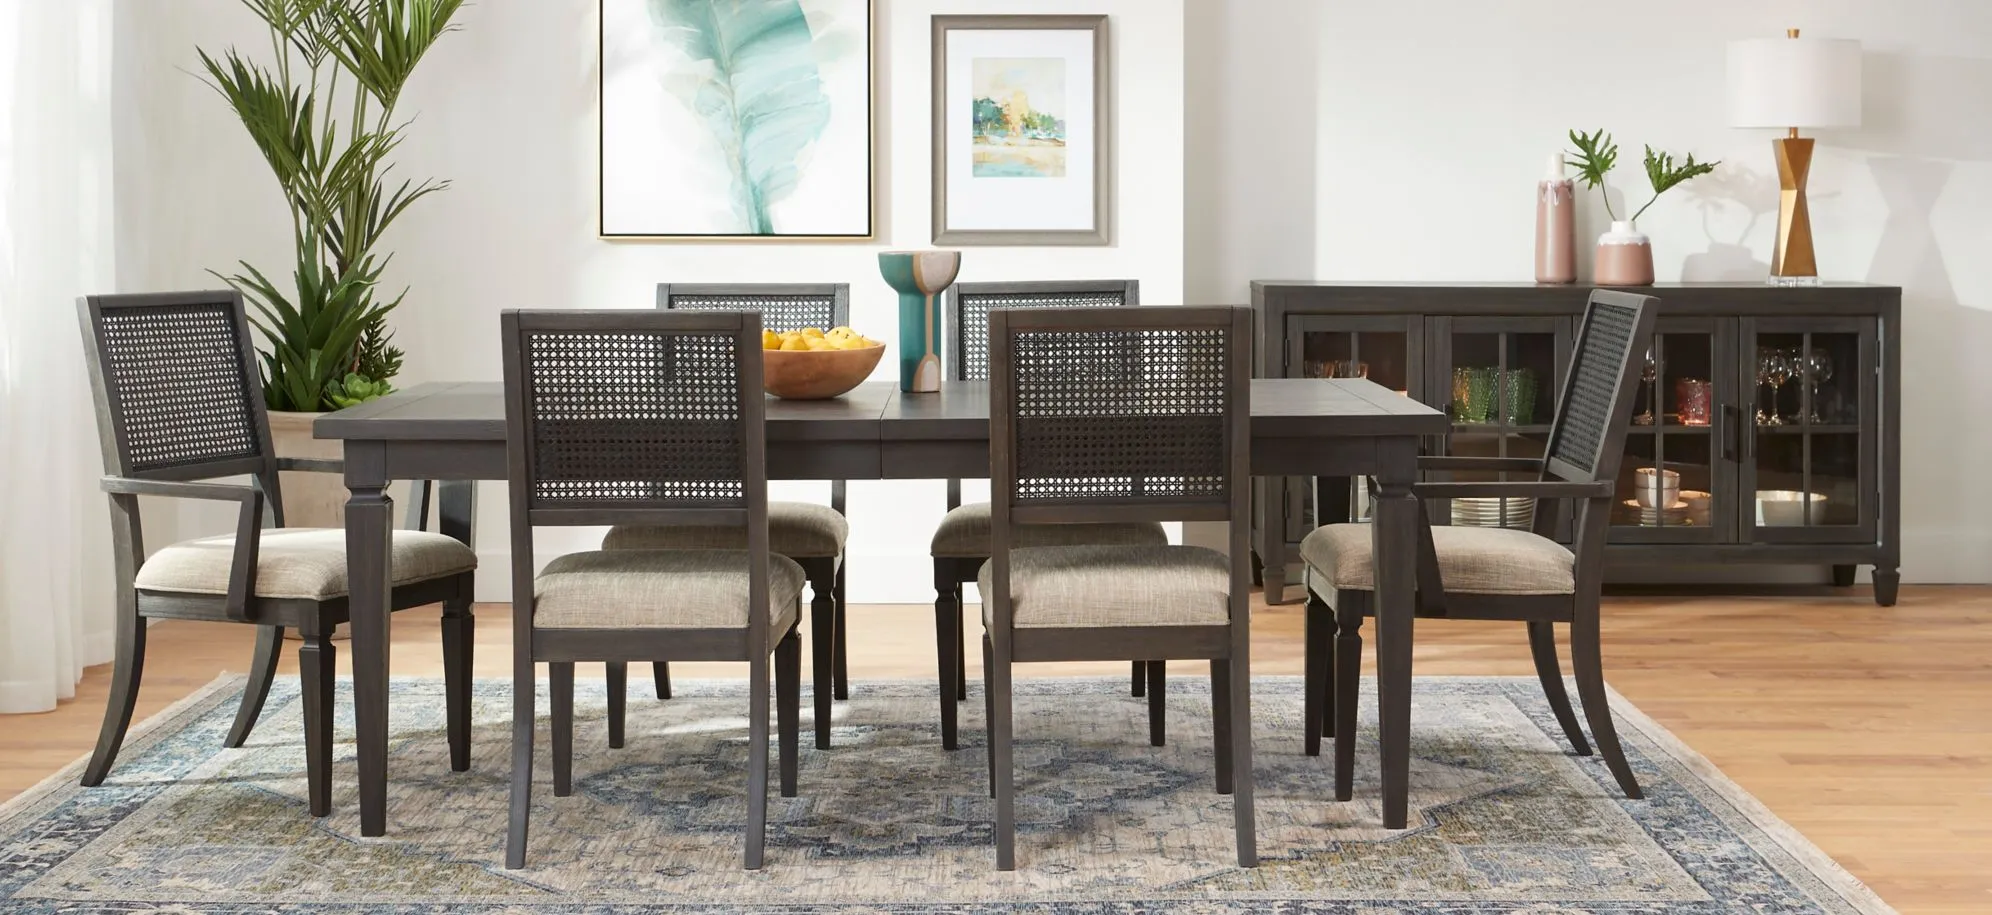 Dutton 7pc Dining Set in Blackstone by Liberty Furniture